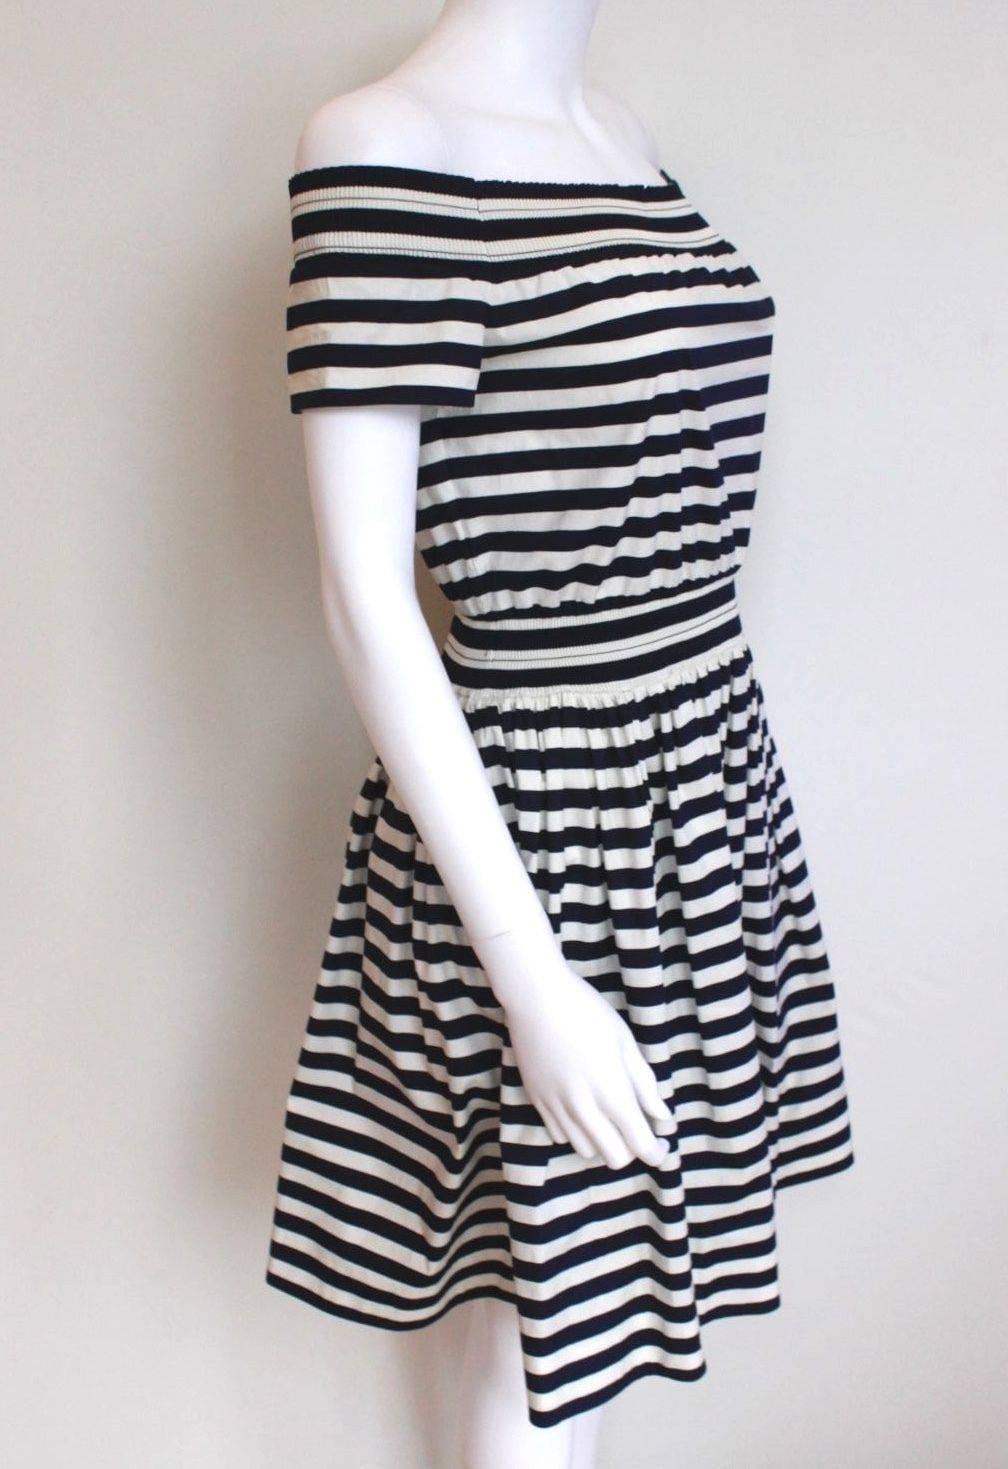 New Prada Cotton Navy striped Dress 42 uk 10 
Light wight cotton dress from Prada featuring elasticated waist and shoulders
Dark navy stripes
New, excellent condition 